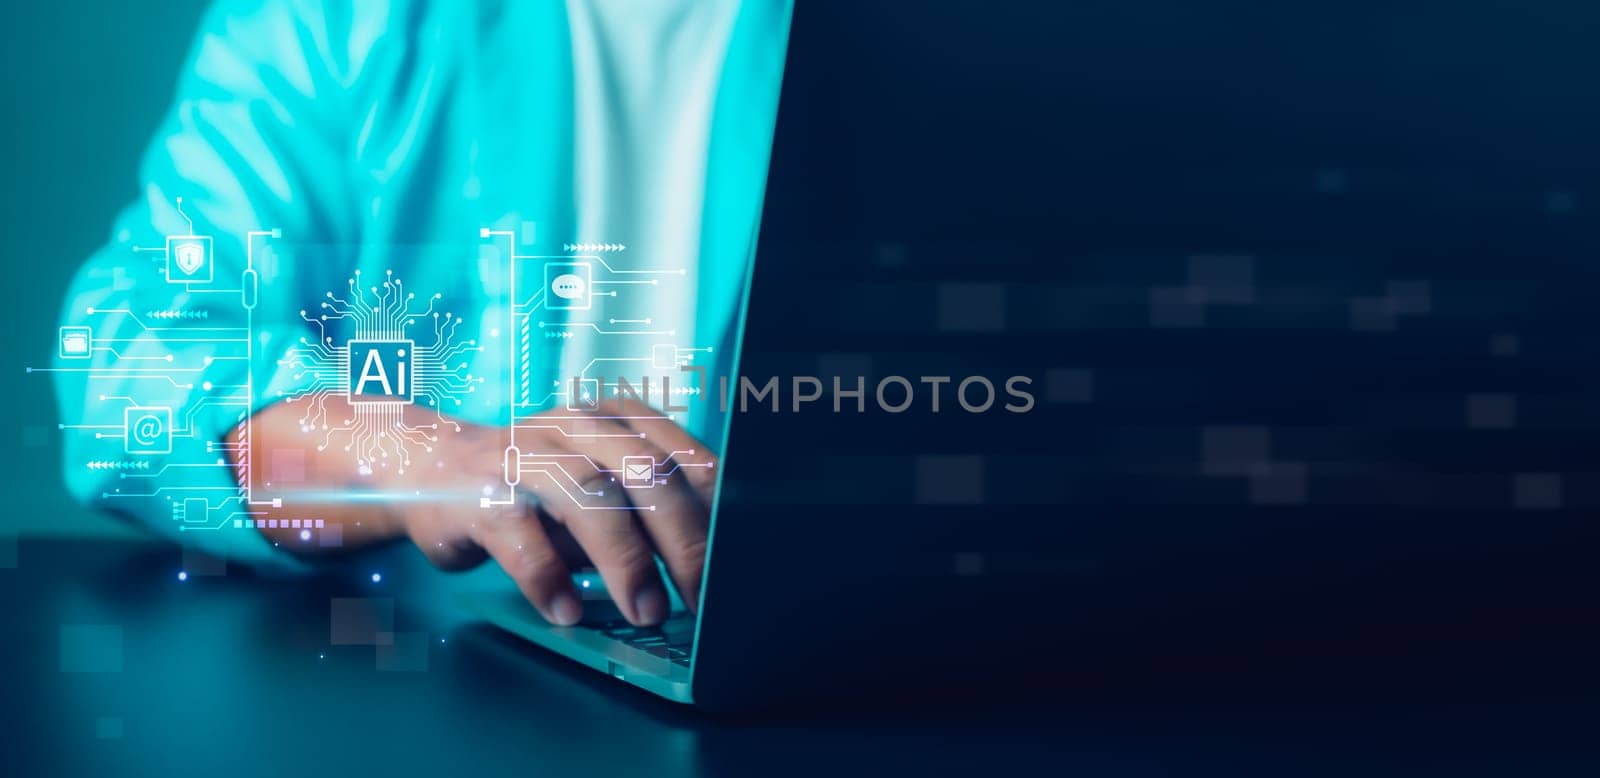 Businessman shows icon on using artificial intelligence (Ai) technology with virtual screen showing dangerous software access or online hacker threat, cyber security concept. by Unimages2527